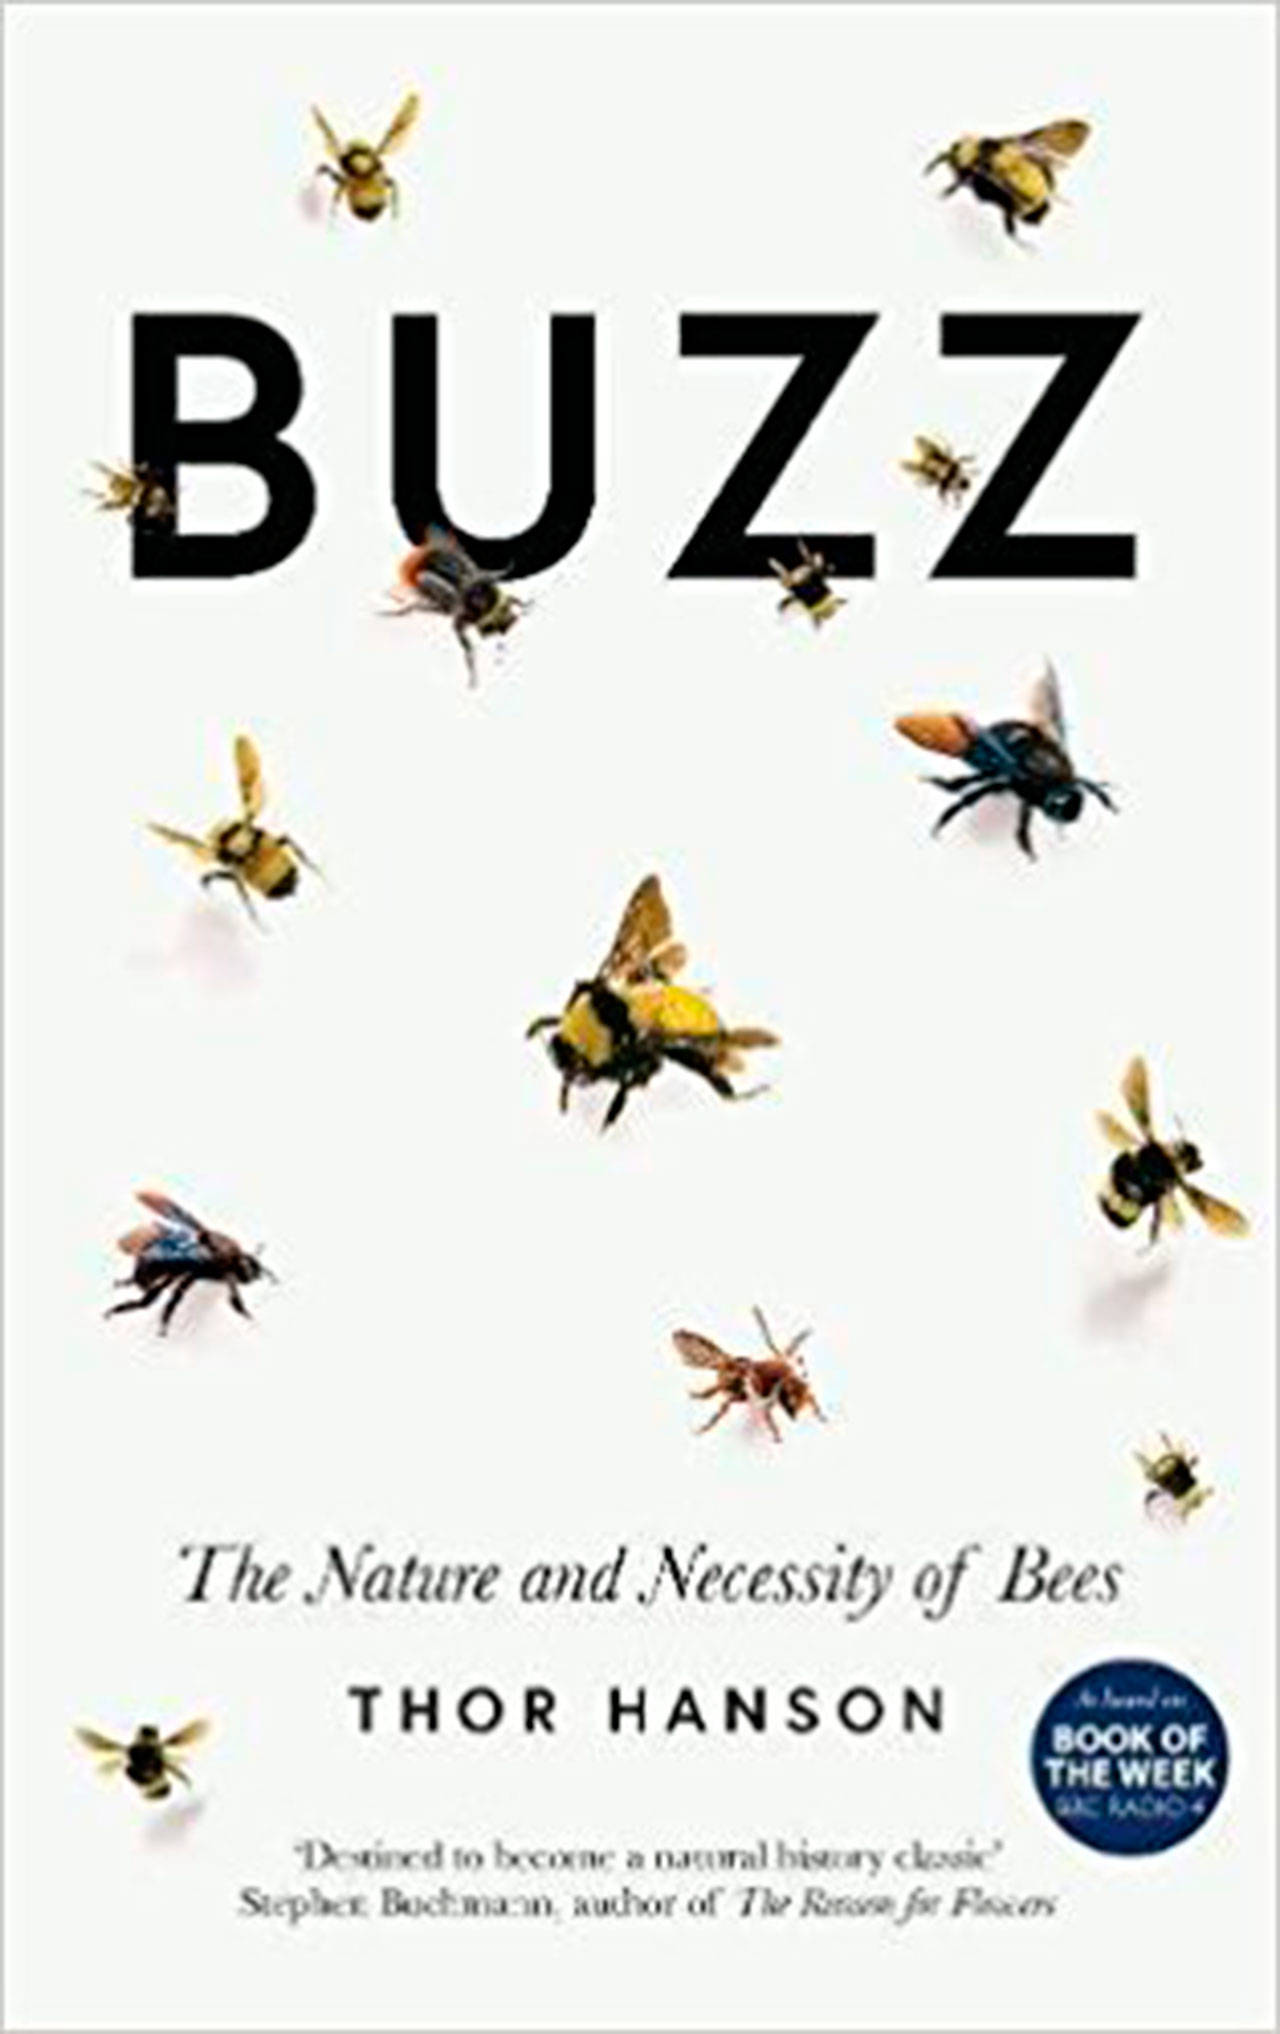 Image courtesy of Eagle Harbor Book Company | Thor Hanson, author of “Feathers” and “The Triumph of Seeds,” will visit Eagle Harbor Book Company at 6:30 p.m. Friday, July 13 to discuss his new book “Buzz: The Nature and Necessity of Bees.”